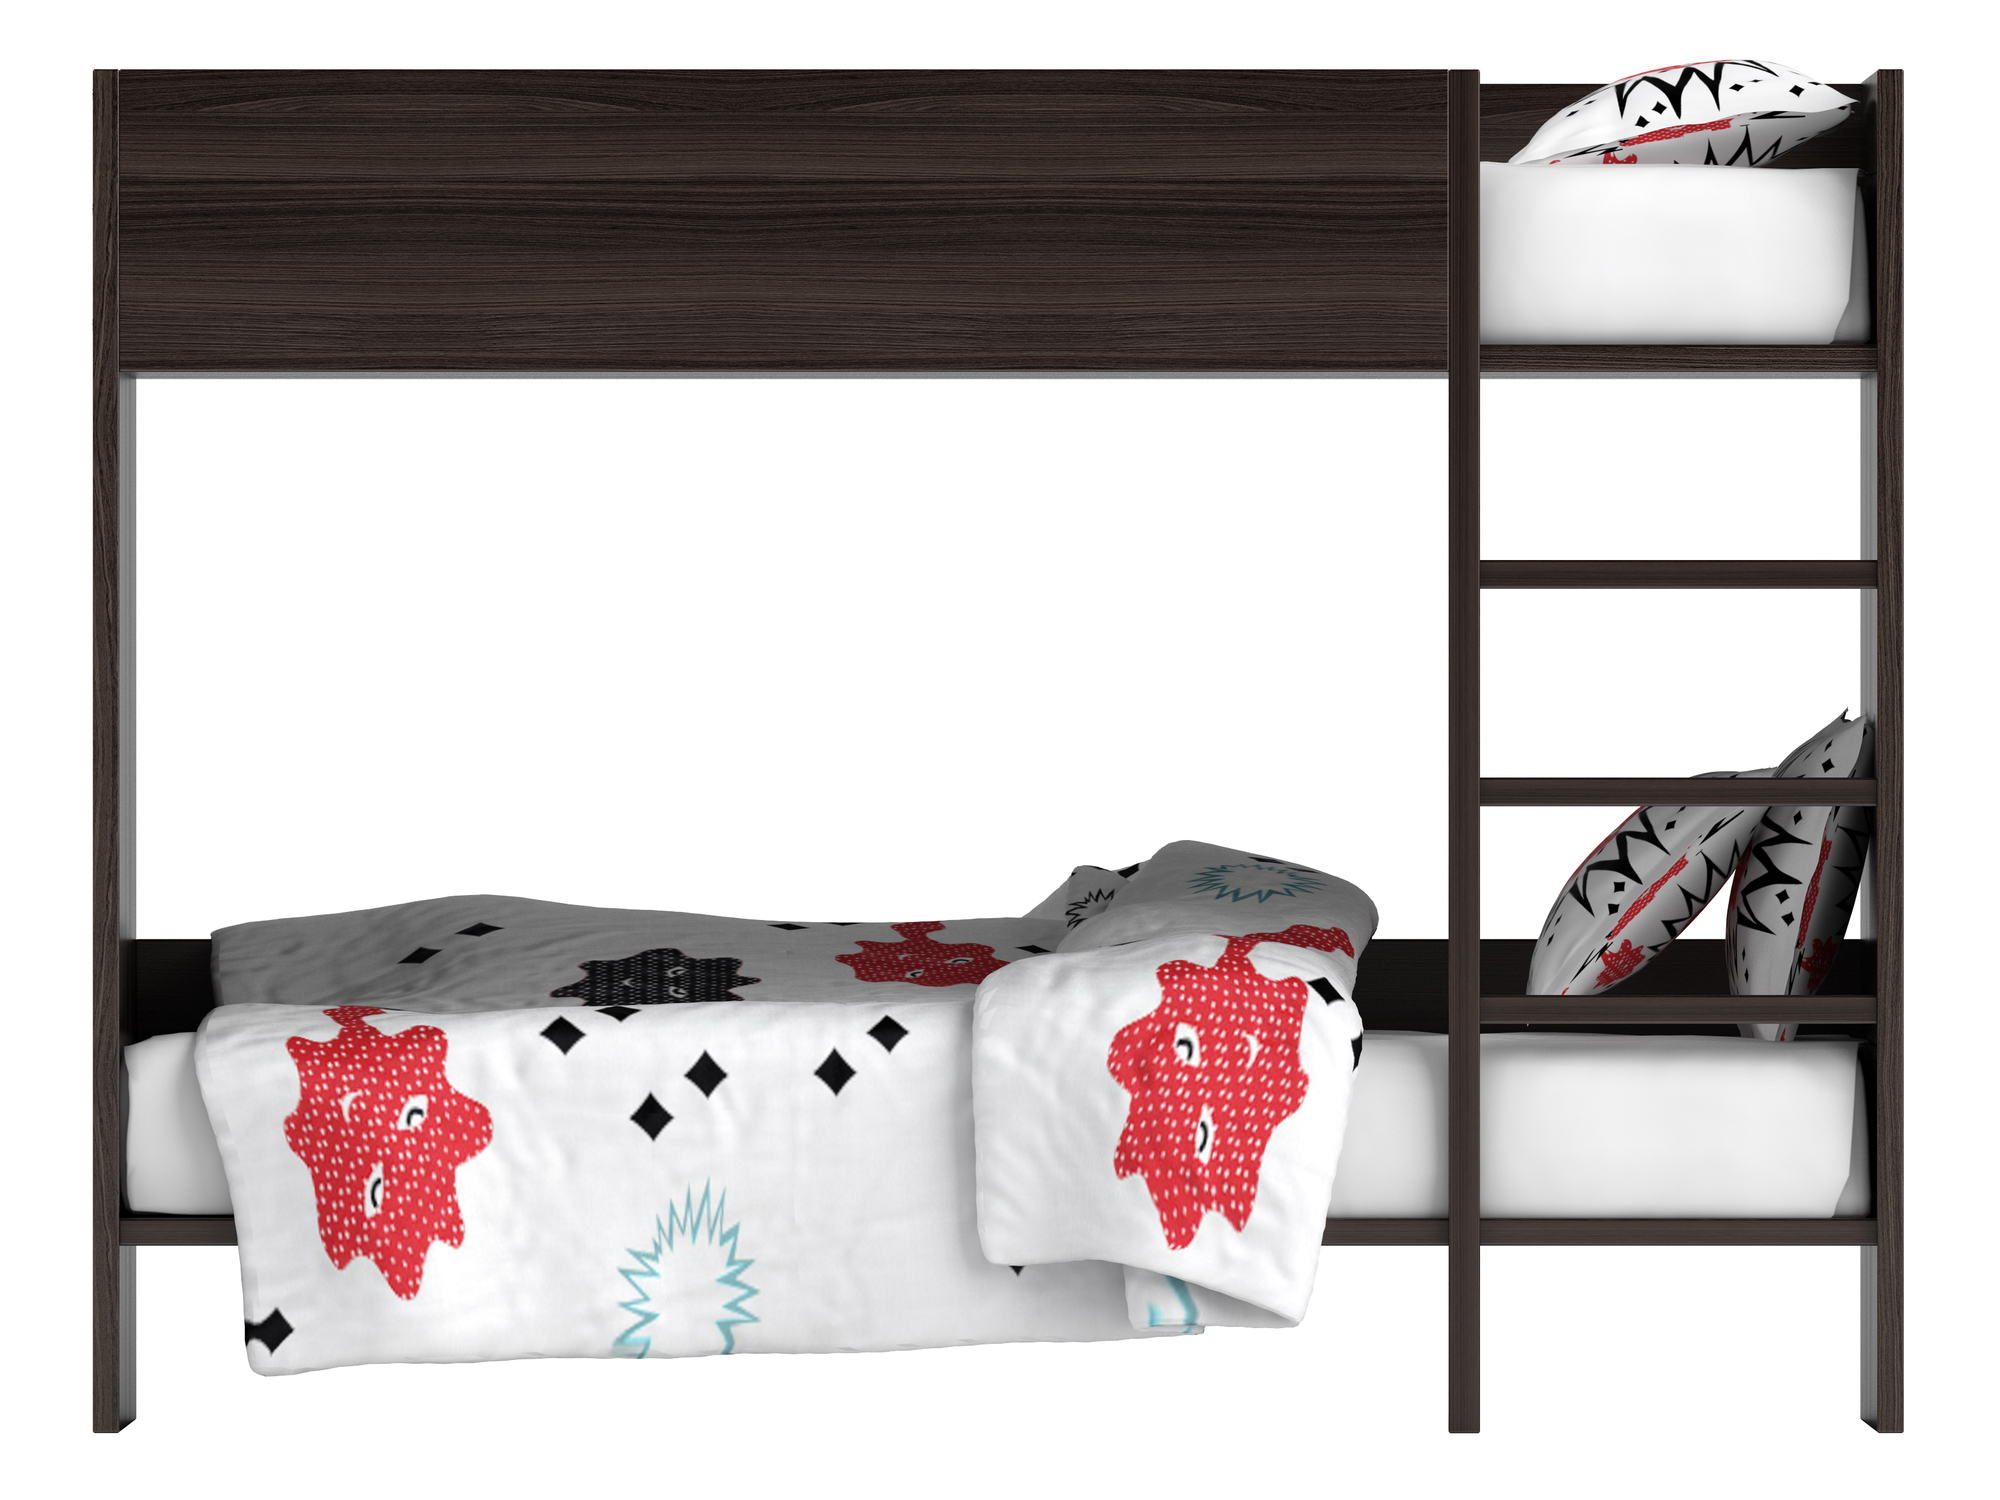 Modern black double bunk bed with colourful bedding with geometric patterns